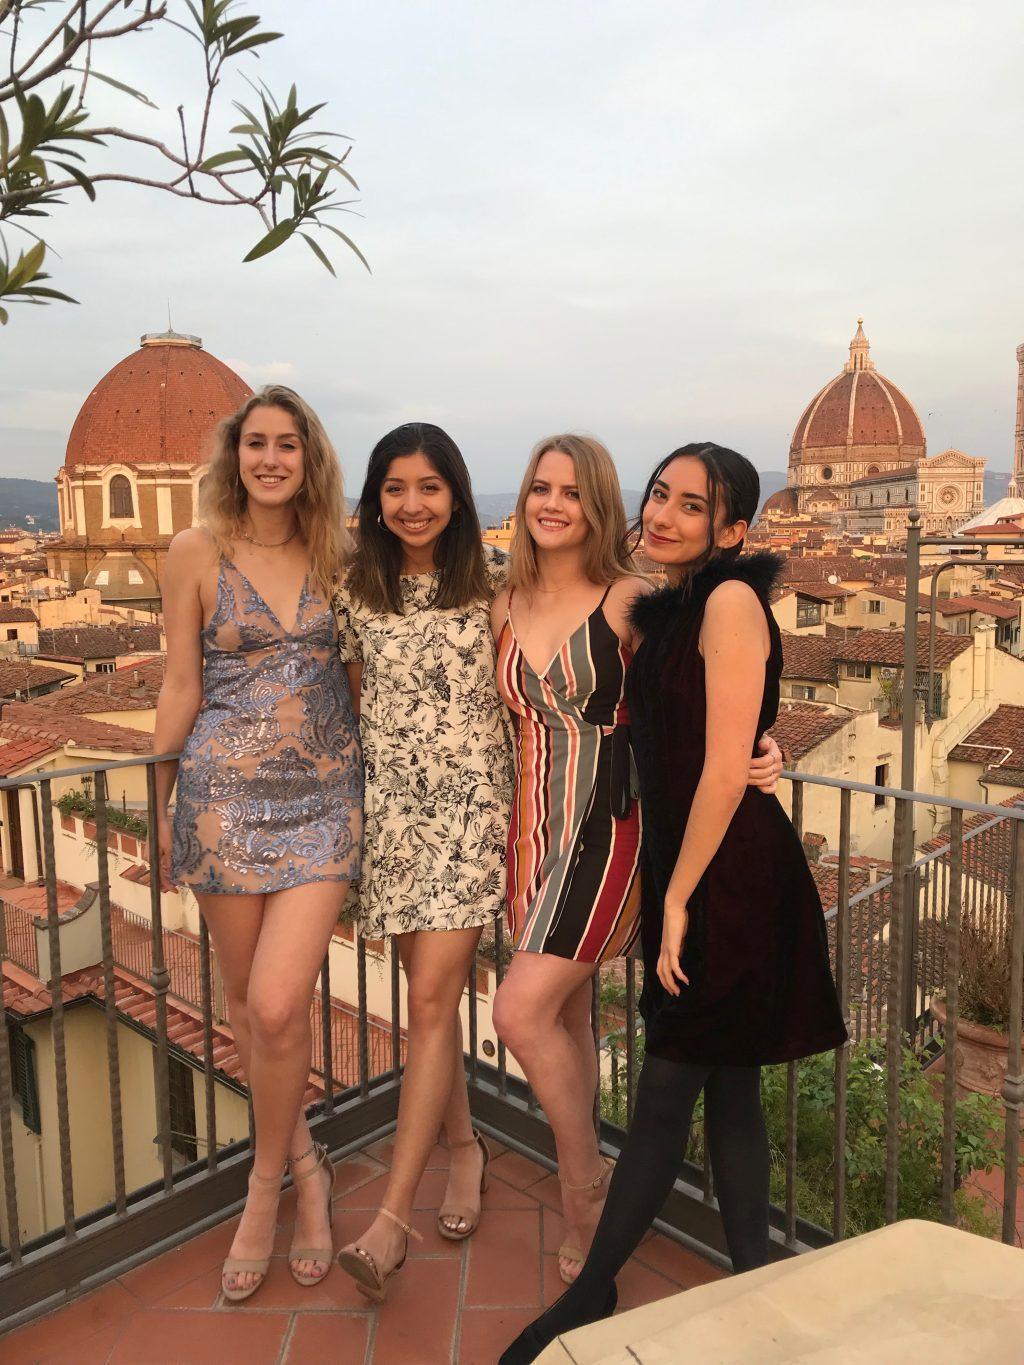 Campbell (far right) poses for a photo during her final banquet in Florence, Italy in April 2019 with seniors Allie Skupin (far left), Daniela Singleterry (middle) and Grace Heflin (middle). All the program participants attended this banquet at a hotel on the last night before everyone flew home.